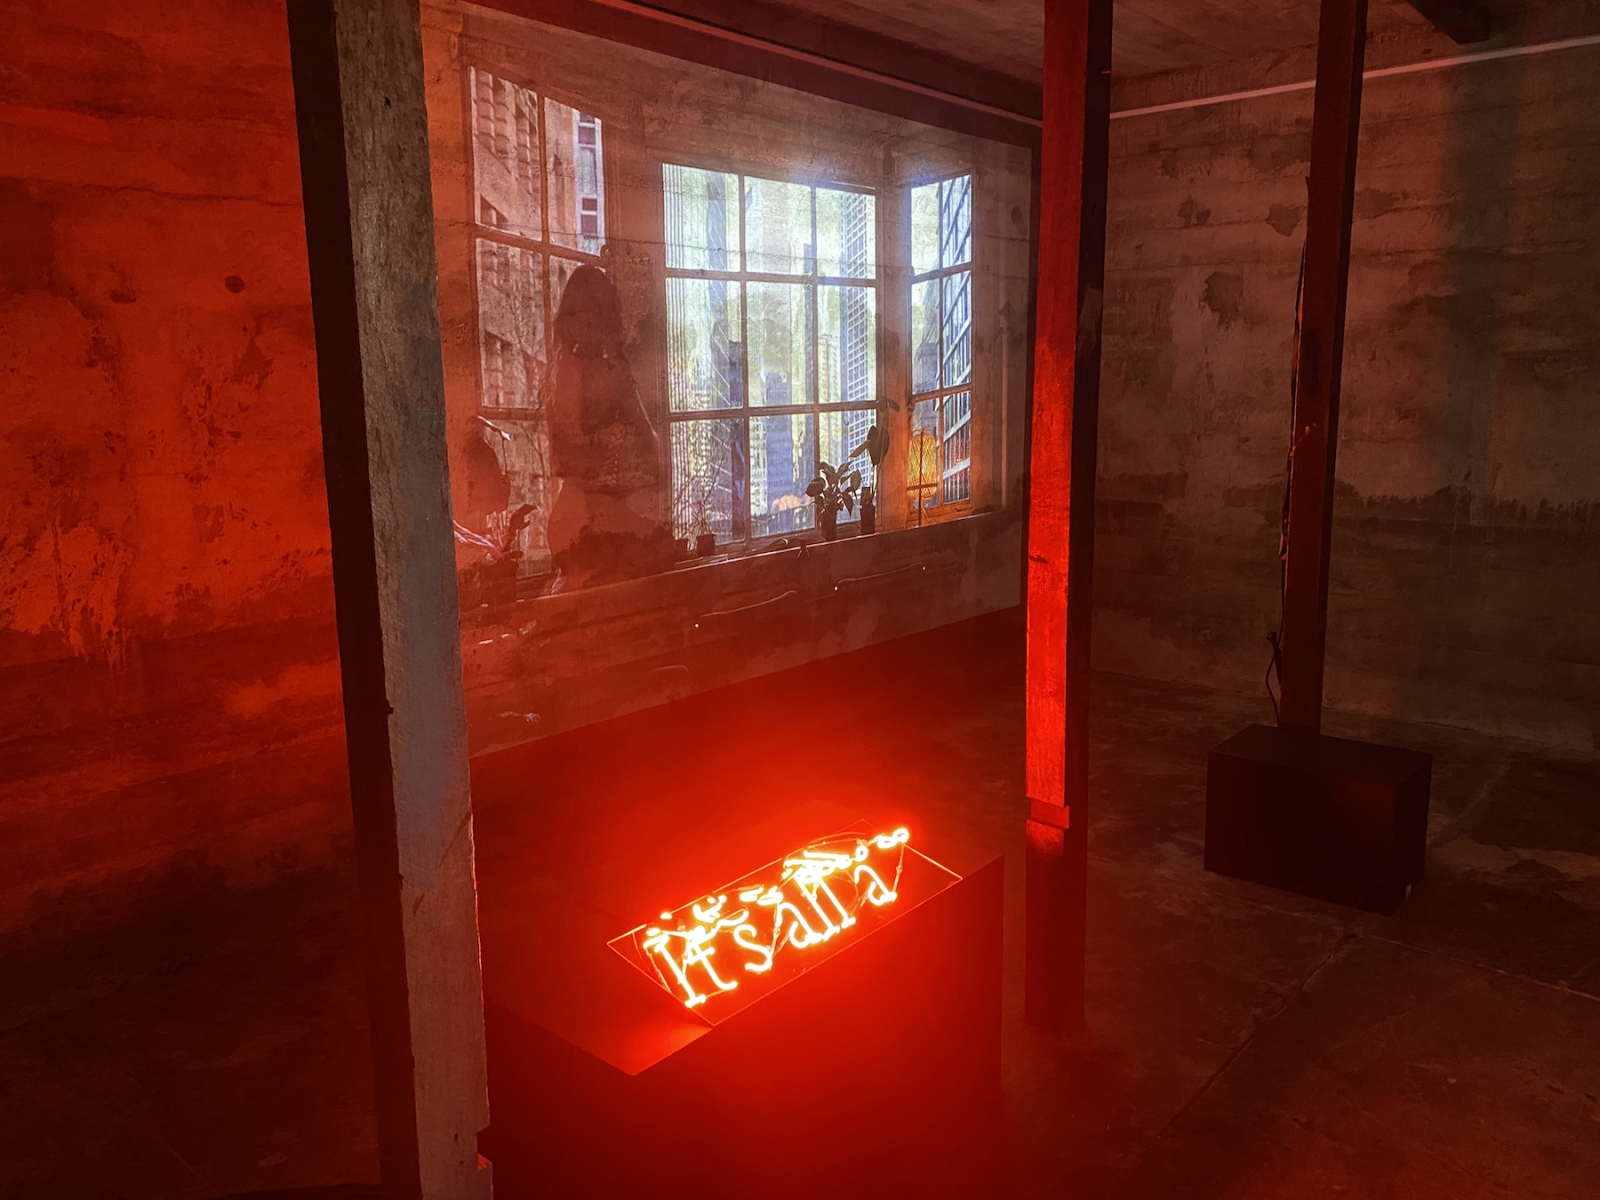 Red light from neon text reading "it's all a" fills a room of exposed timber and concrete, on the far wall a video projection shows a figure sitting in front of a city window